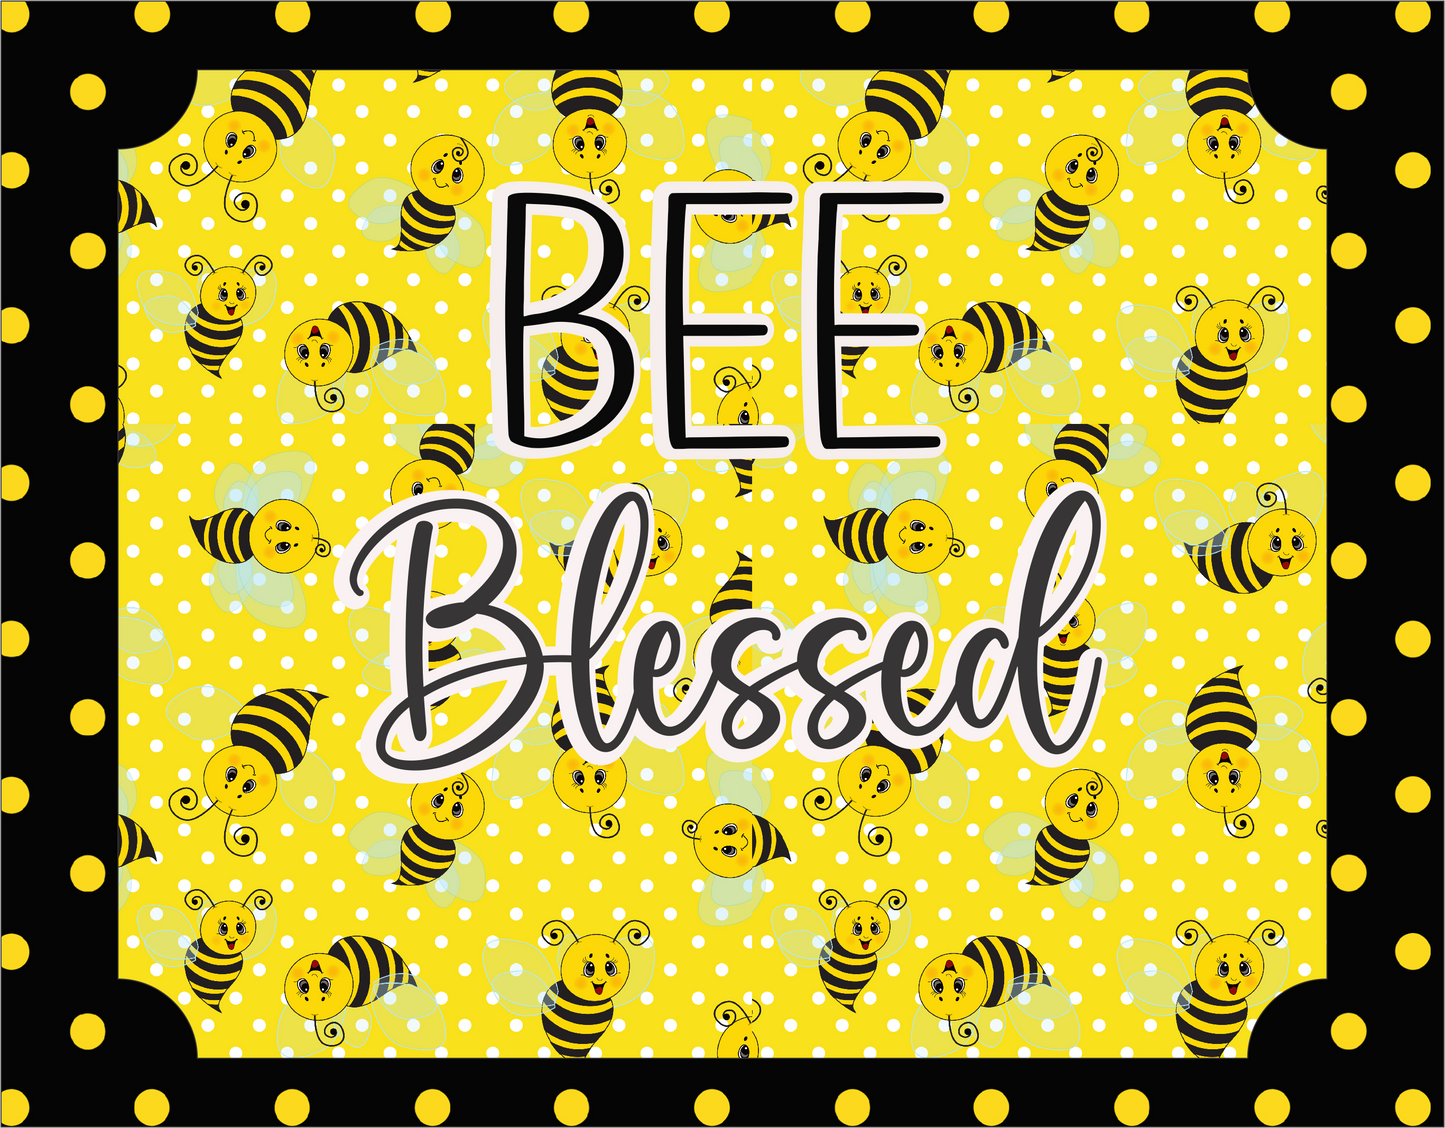 BEE Blessed 9x7